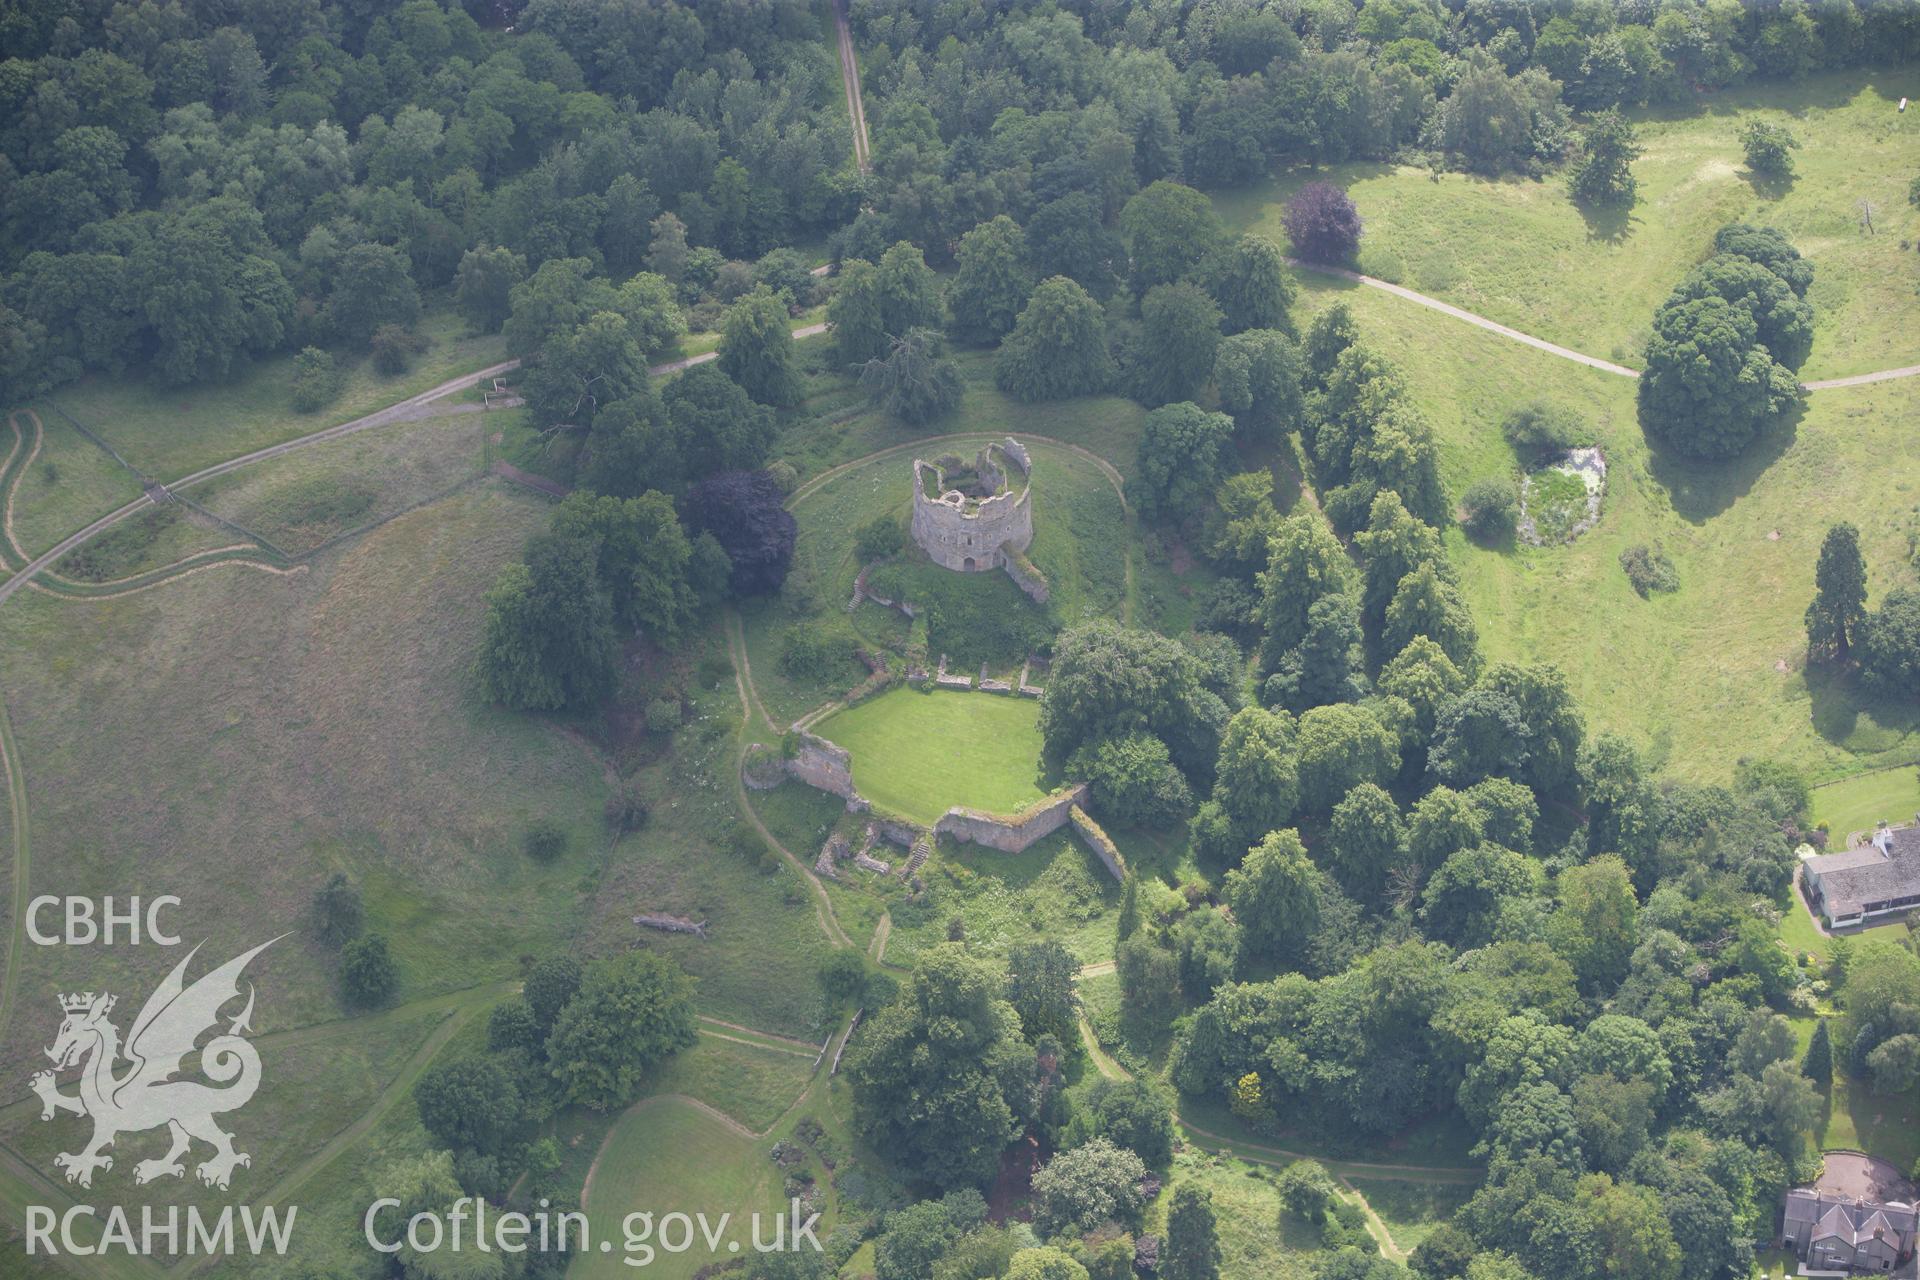 RCAHMW colour oblique photograph of Hawarden Castle ruins. Taken by Toby Driver on 01/07/2008.